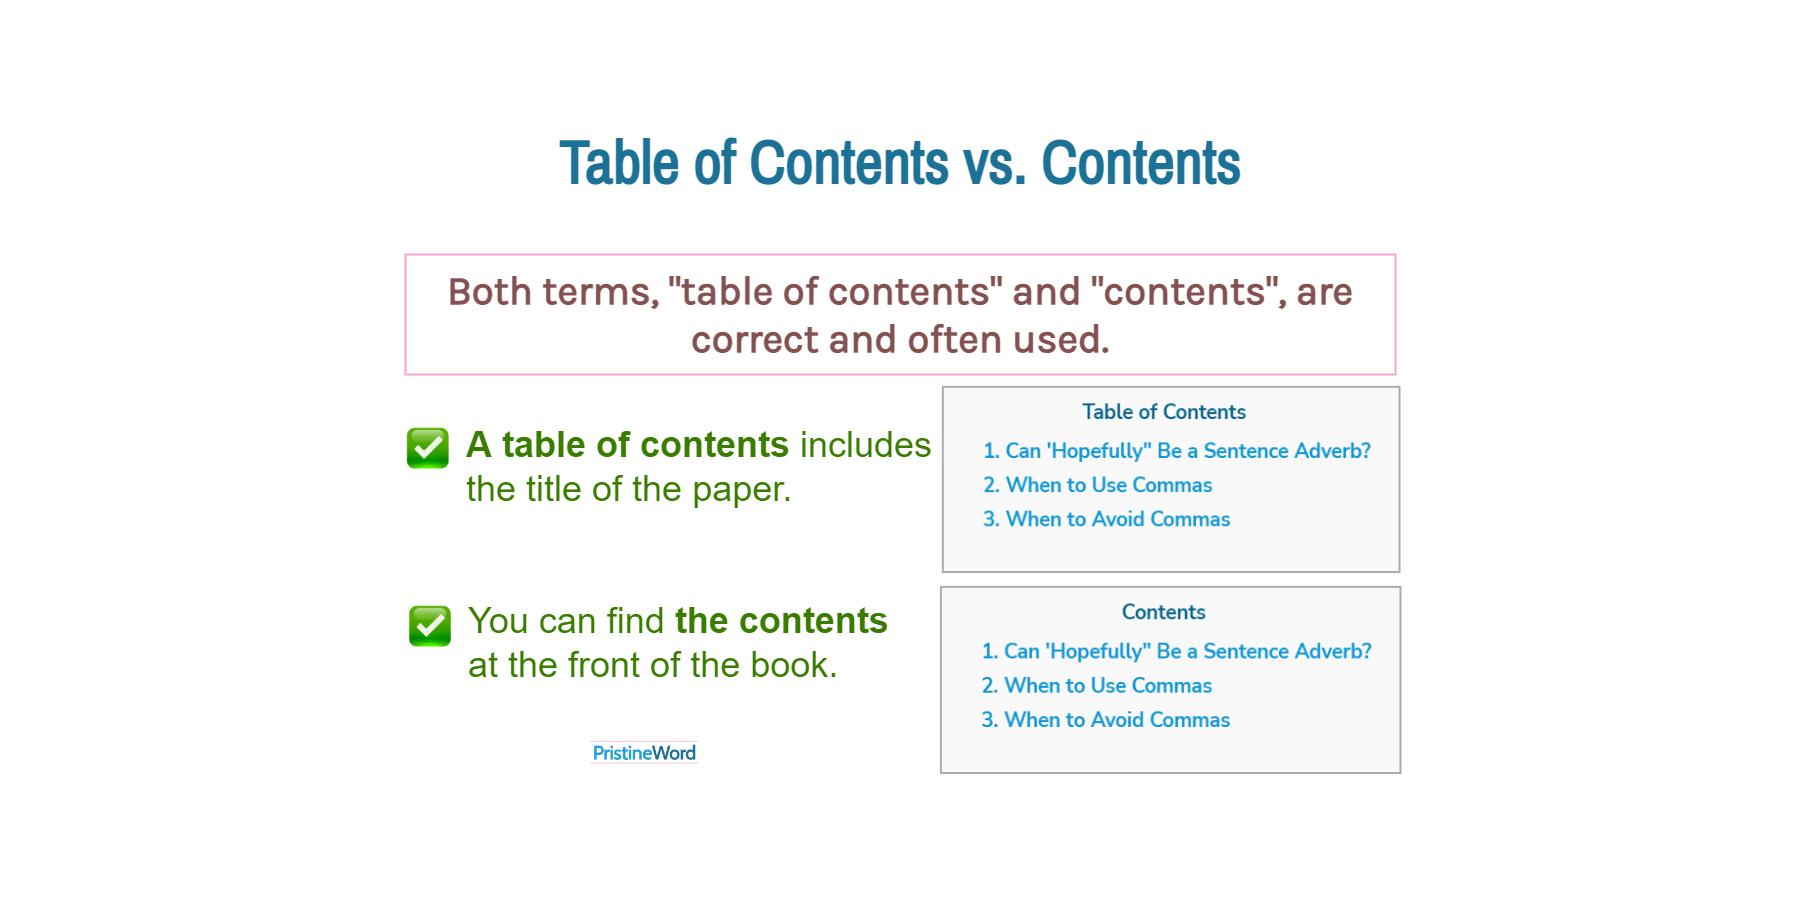 'Table of Contents' vs. 'Contents'